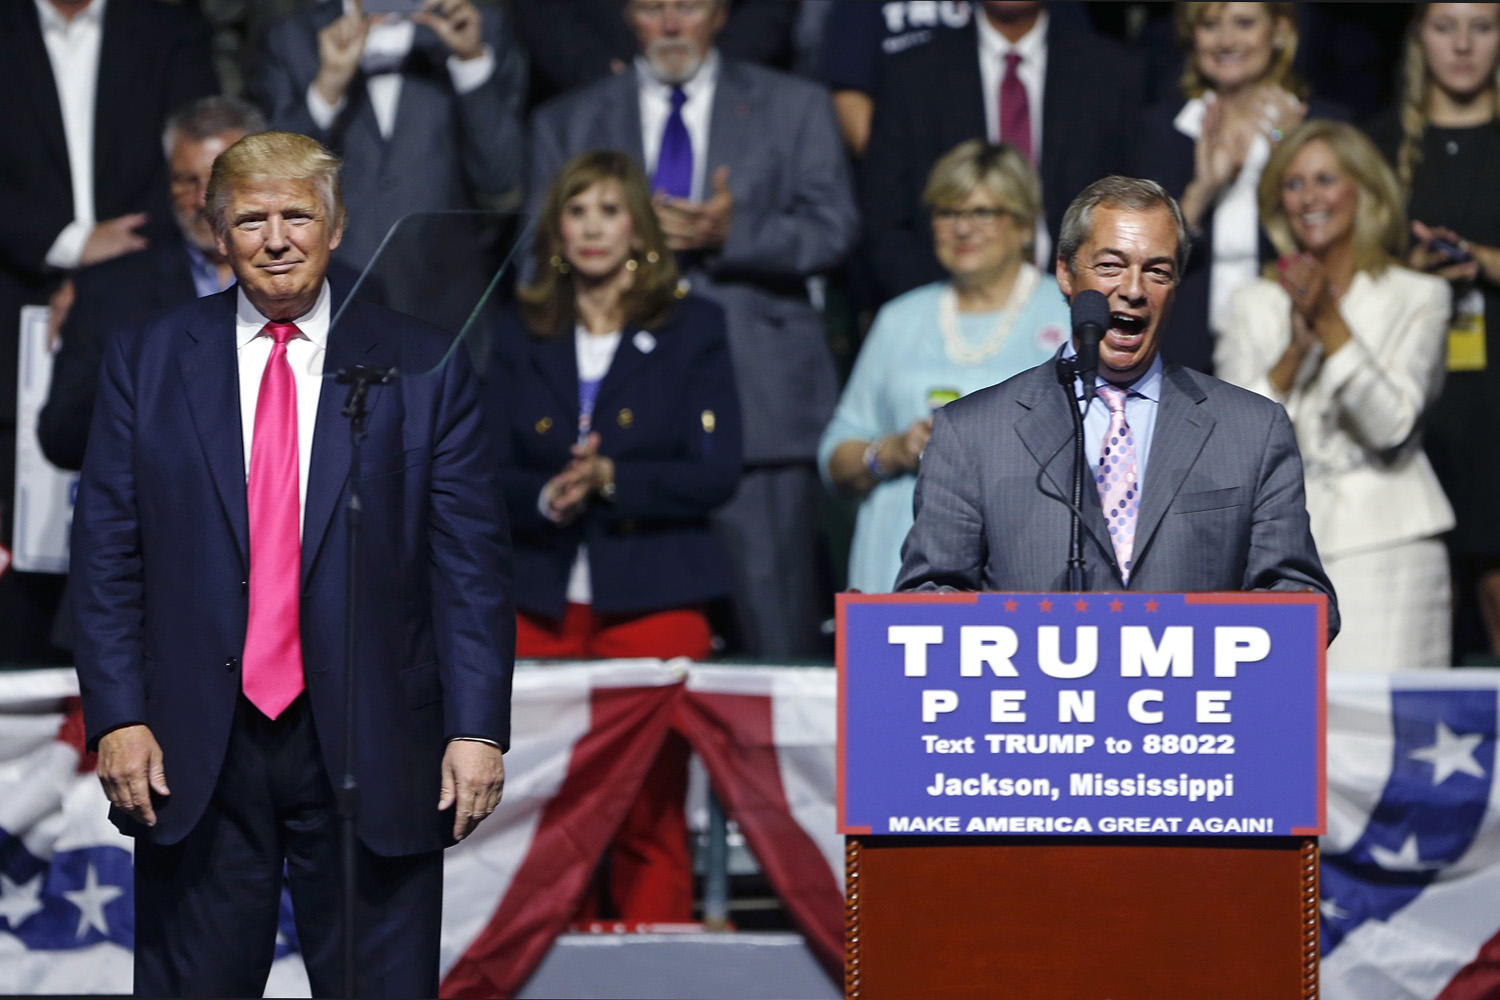 Nigel Farage, ex-leader of the British UKIP party, speaks as Republican presidential candidate Donald Trump, left, listens, at Trump's campaign rally in Jackson, Miss. (Gerald Herbert/AP)